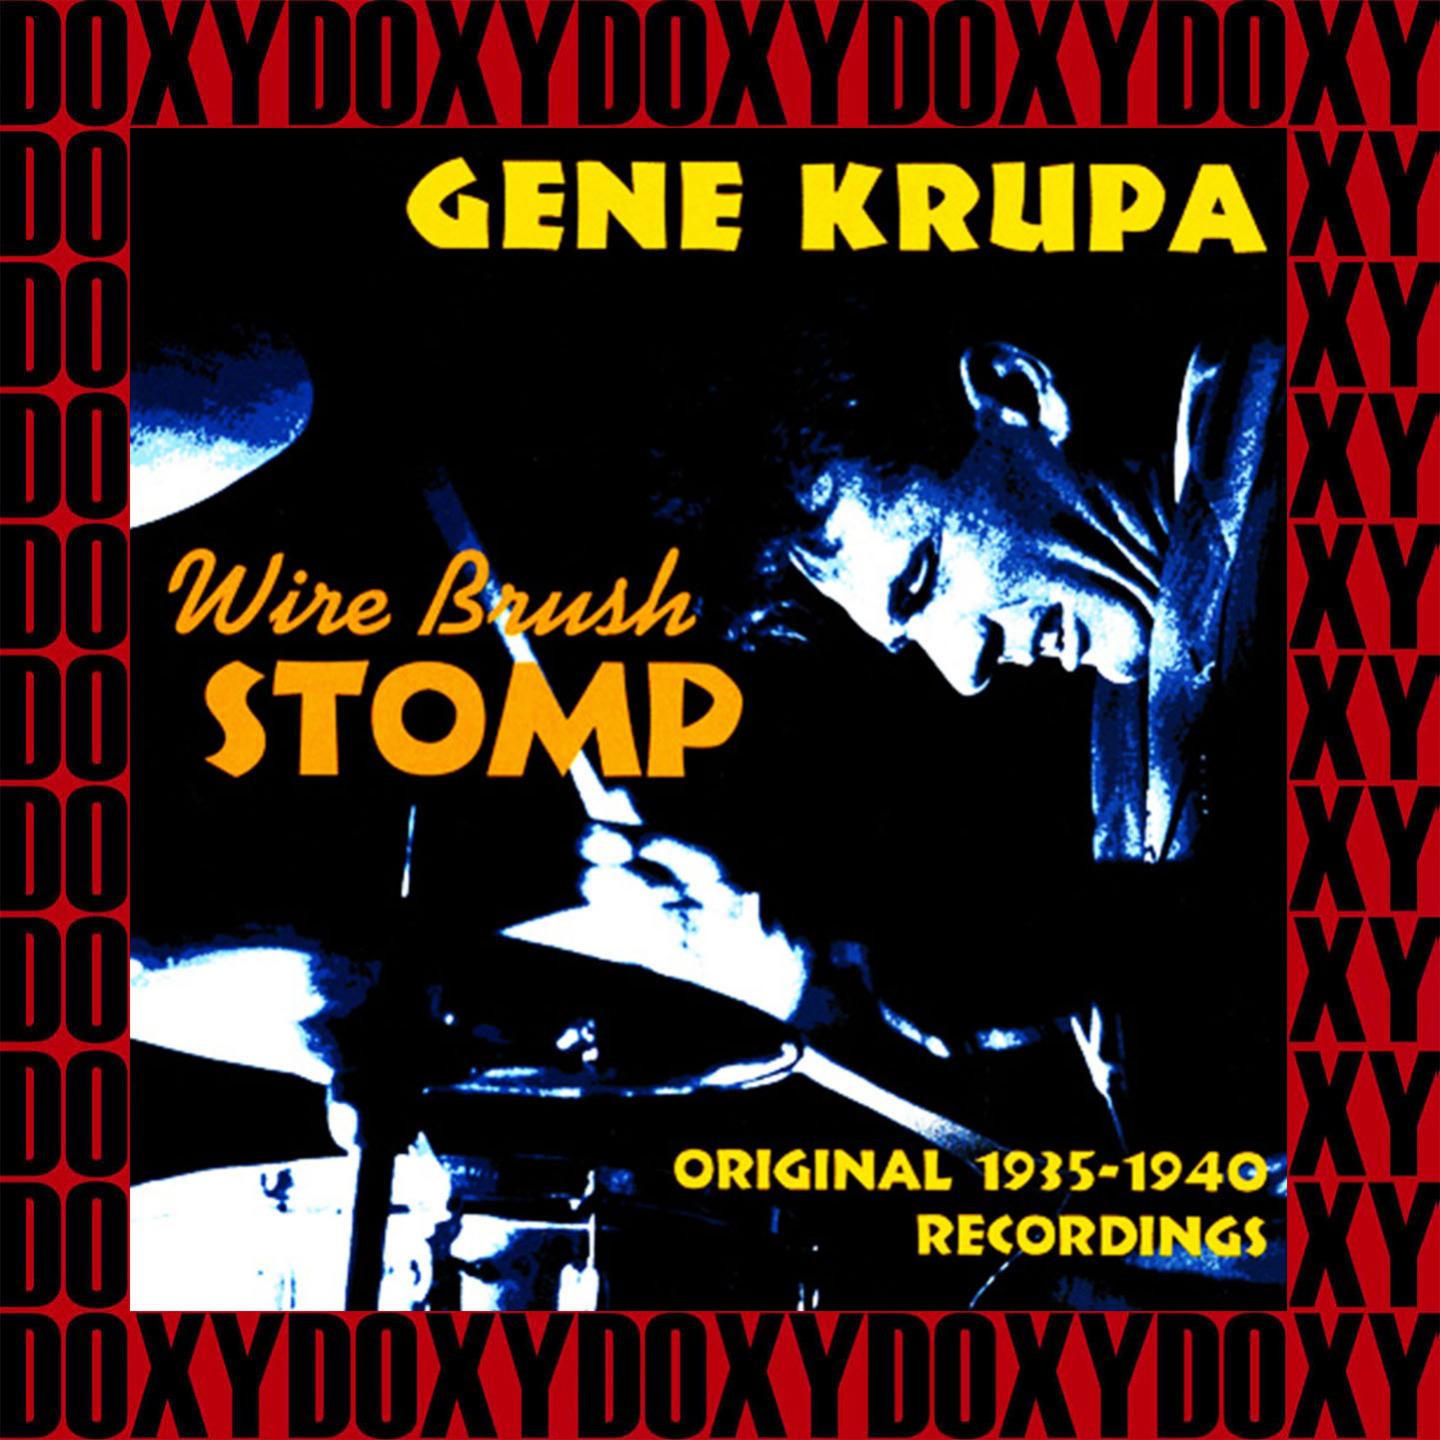 Wire Brush Stomp, Original Recordings 1935-1940 (Remastered Version) (Doxy Collection)